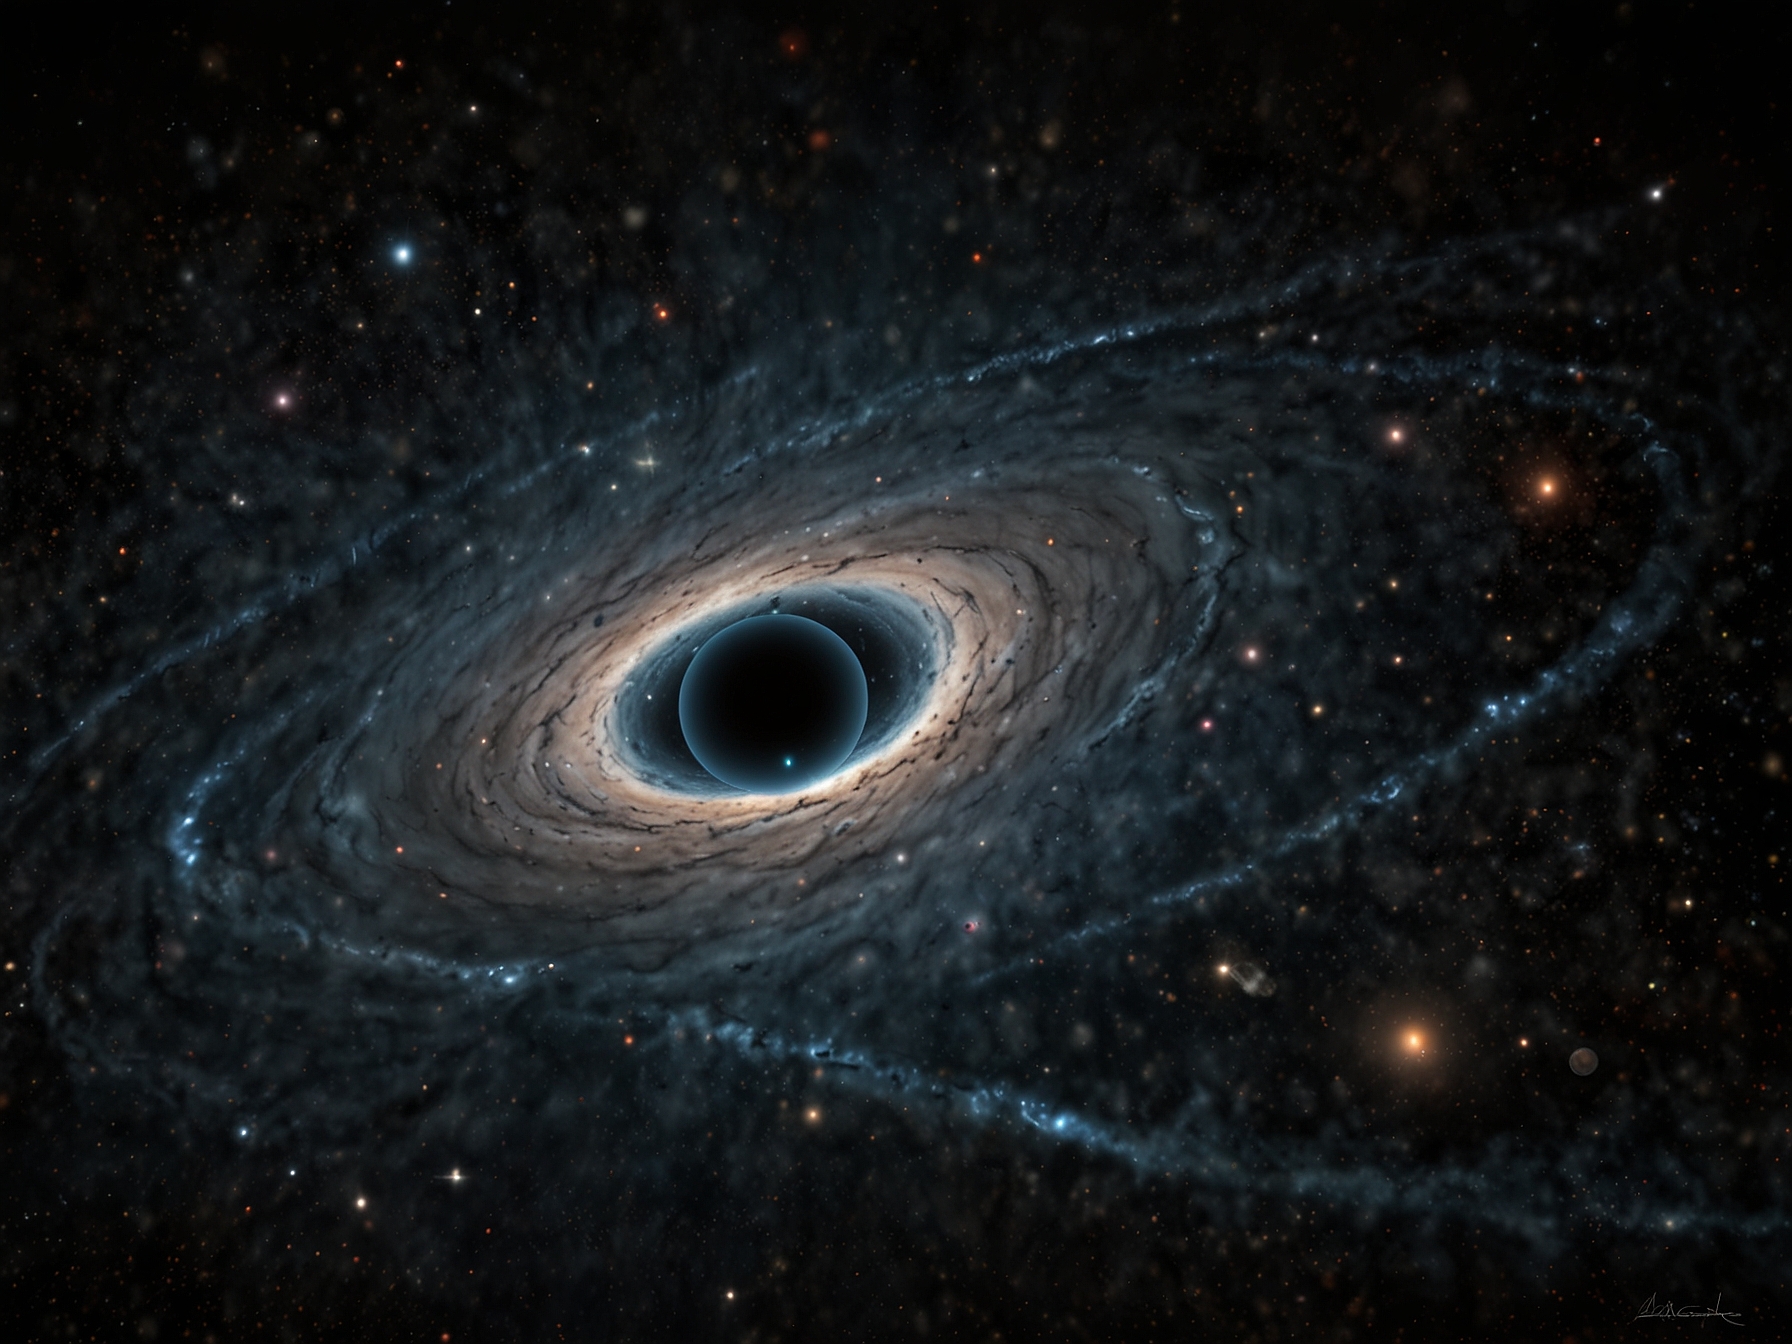 An artist's depiction of supermassive black holes within ancient galaxies, illustrating the surprising rapidity and complexity of their formation in the early universe. This challenges prior cosmic models.